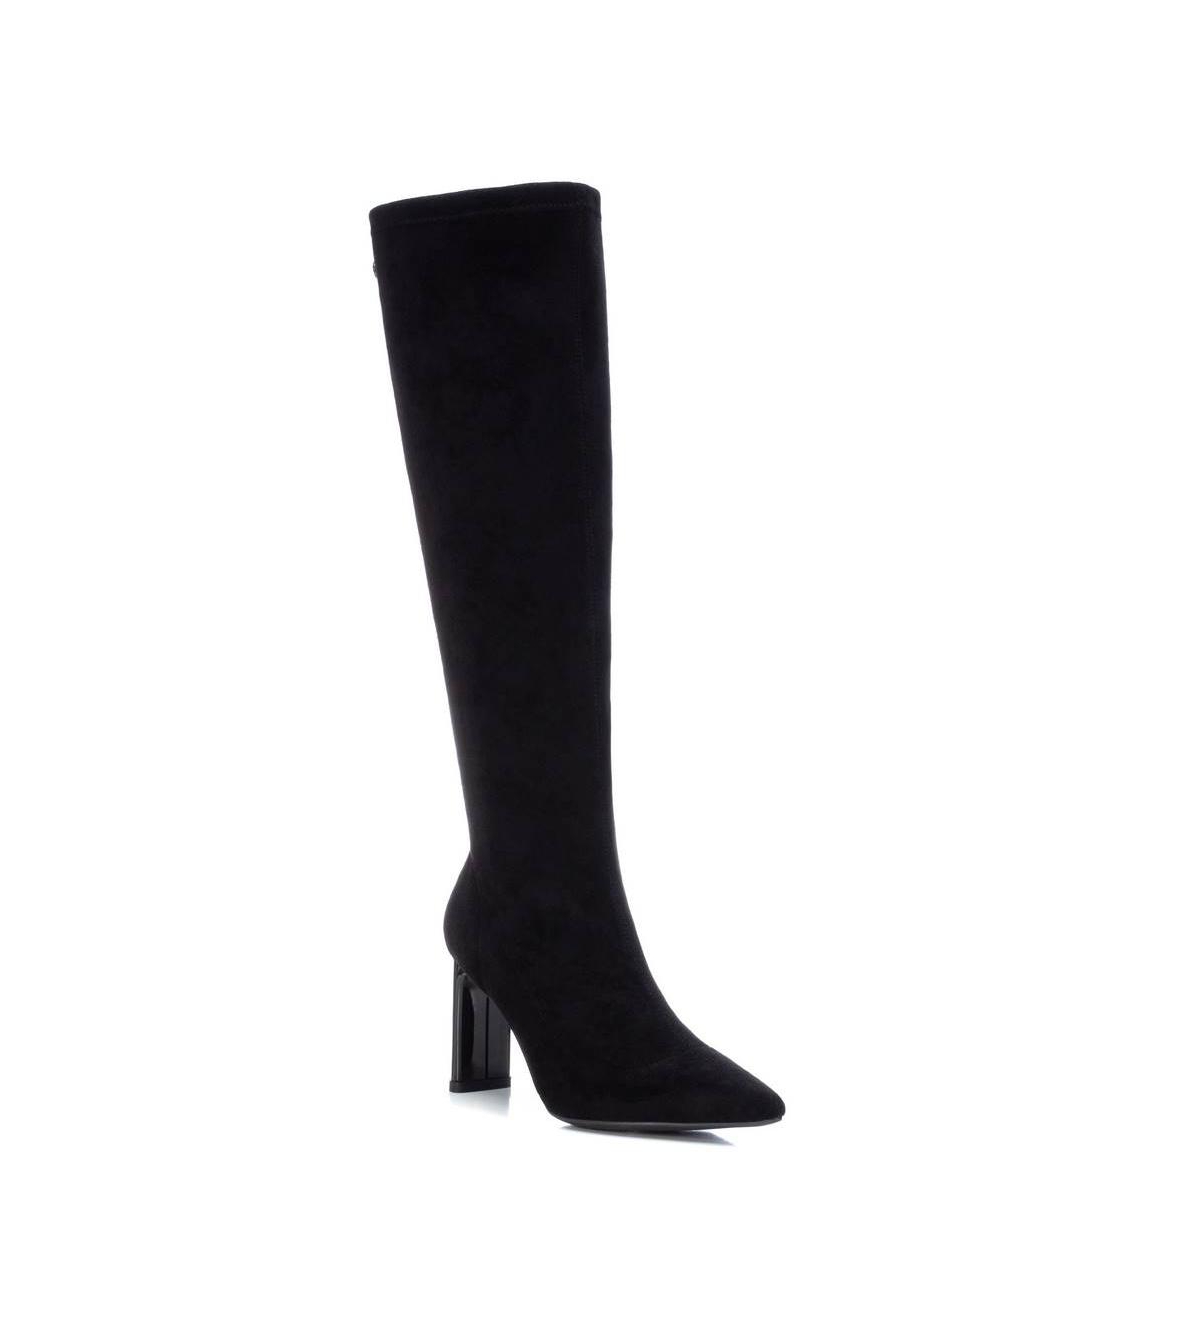 Women's Suede Dress Boots By Xti - Black